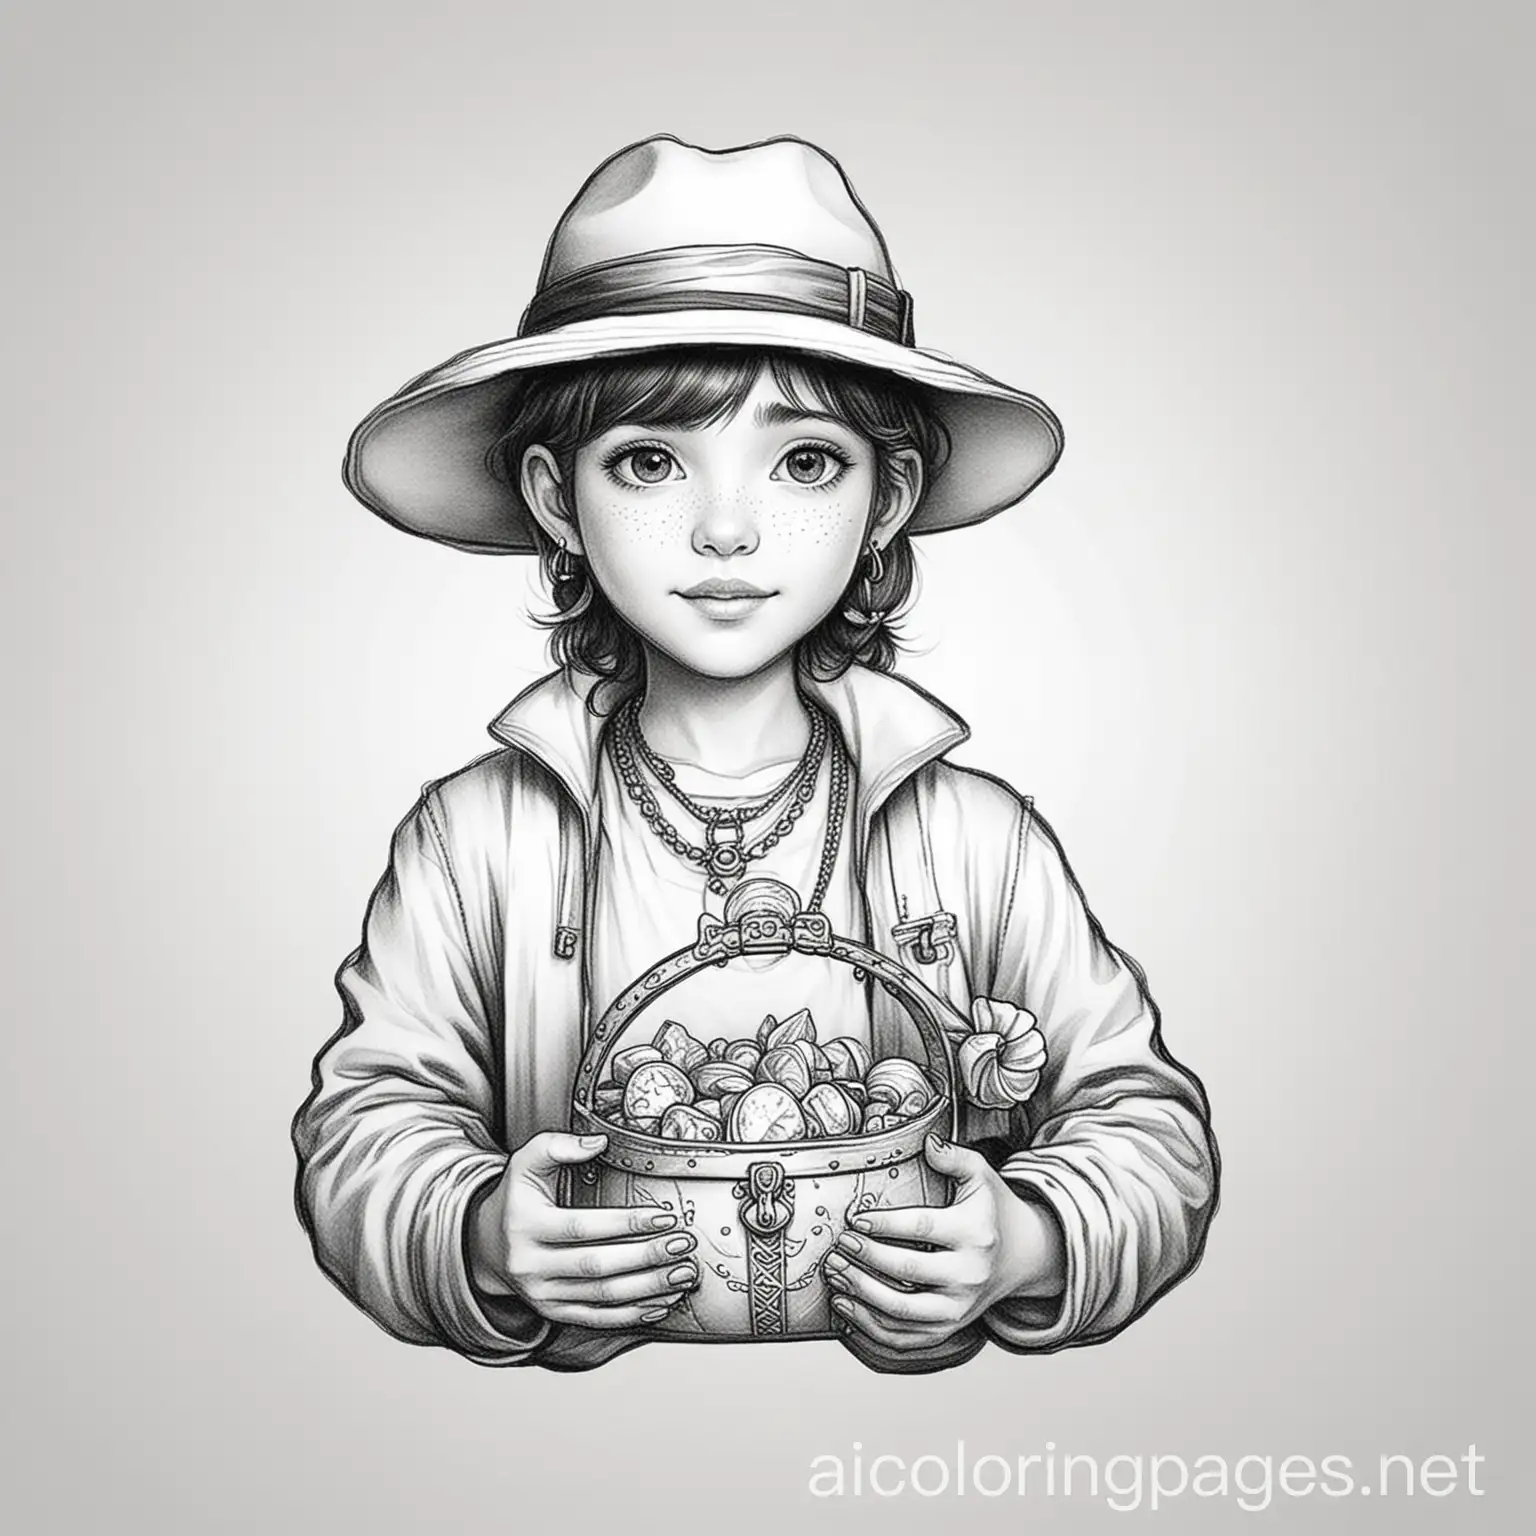 Treasure person with a hat holding treasure, Coloring Page, black and white, line art, white background, Simplicity, Ample White Space. The background of the coloring page is plain white to make it easy for young children to color within the lines. The outlines of all the subjects are easy to distinguish, making it simple for kids to color without too much difficulty